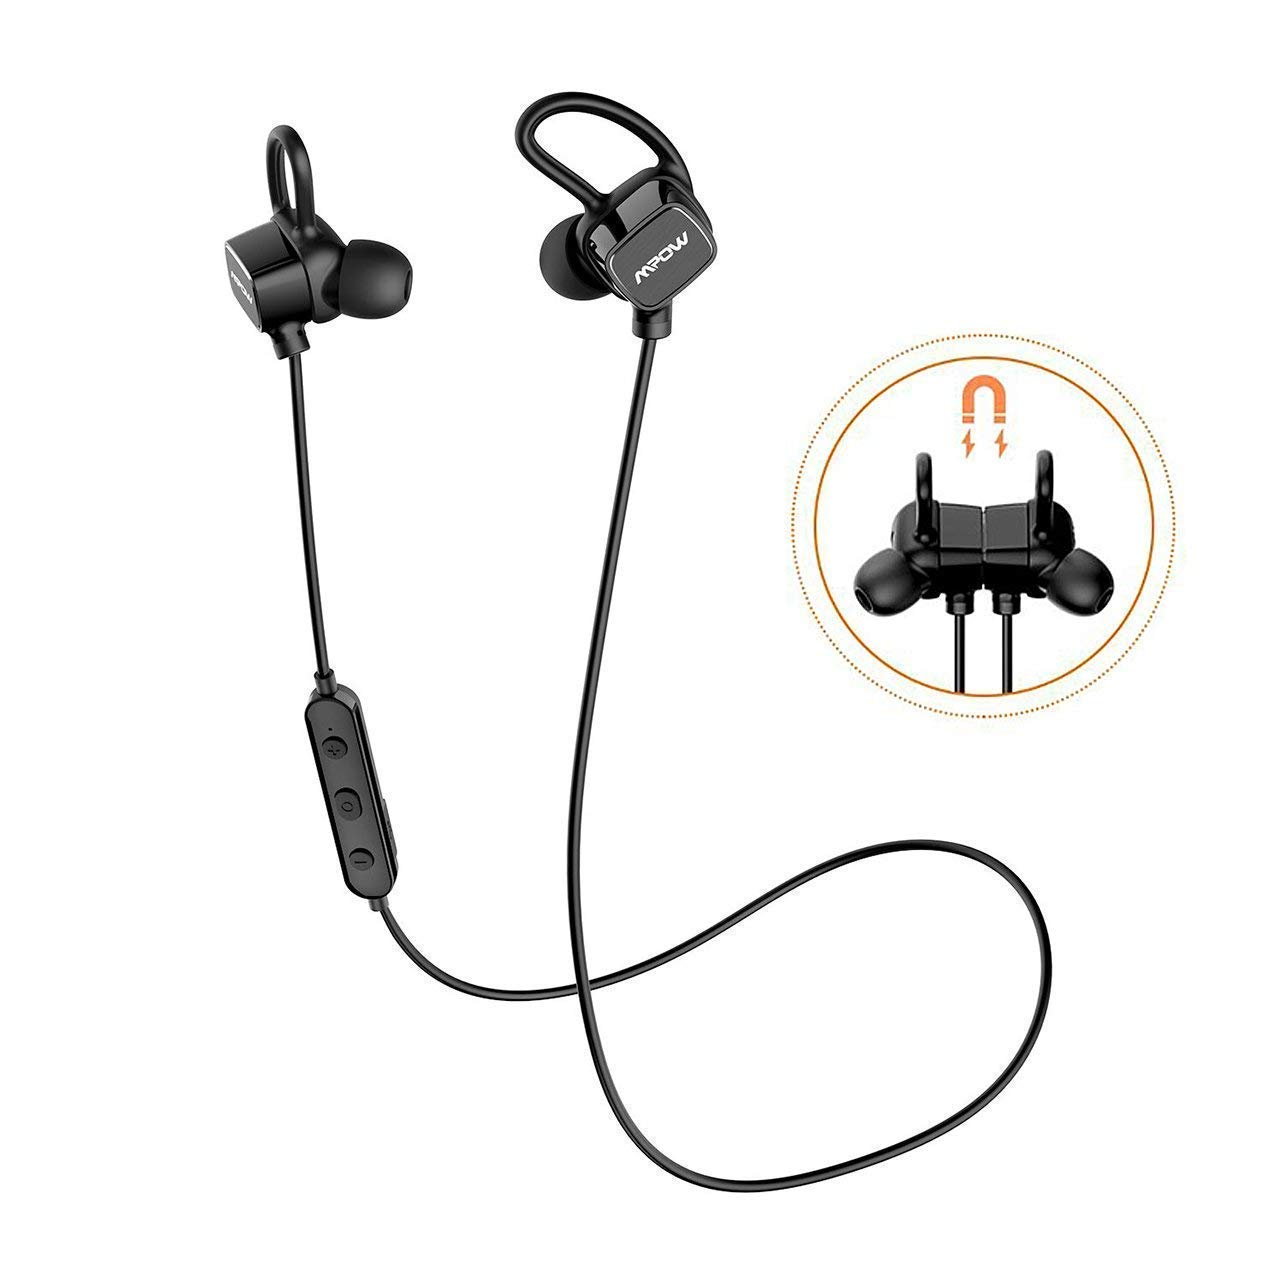 Auriculares Bluetooth MPOW S3 solo 10,9€